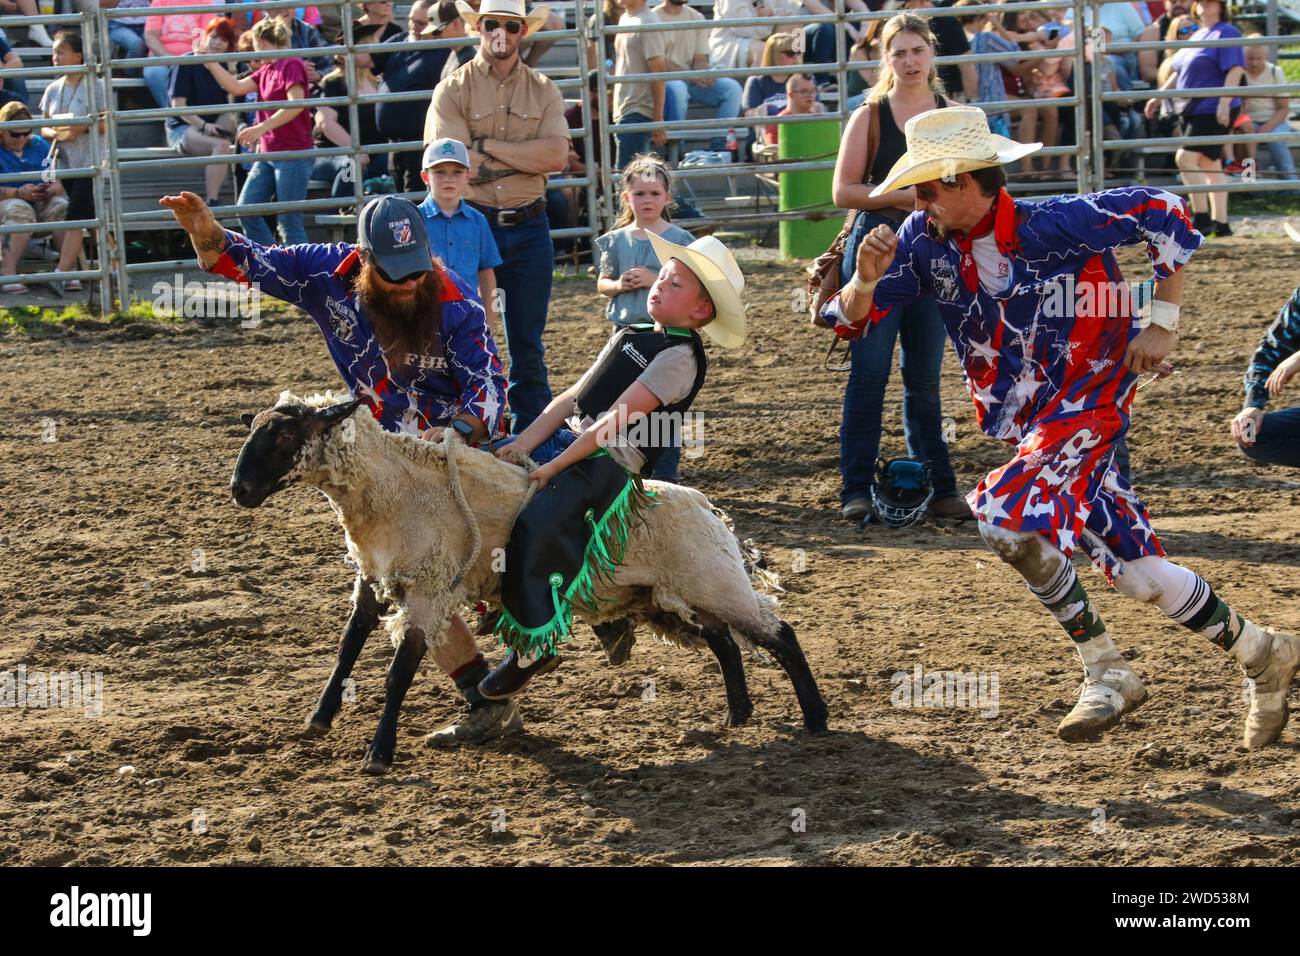 Muttin Bustin. Young boy riding a sheep having quick acceleration. Small town weekly Bull Riding as a sport. Fox Hollow Rodeo. Waynesville, Dayton, Oh Stock Photo